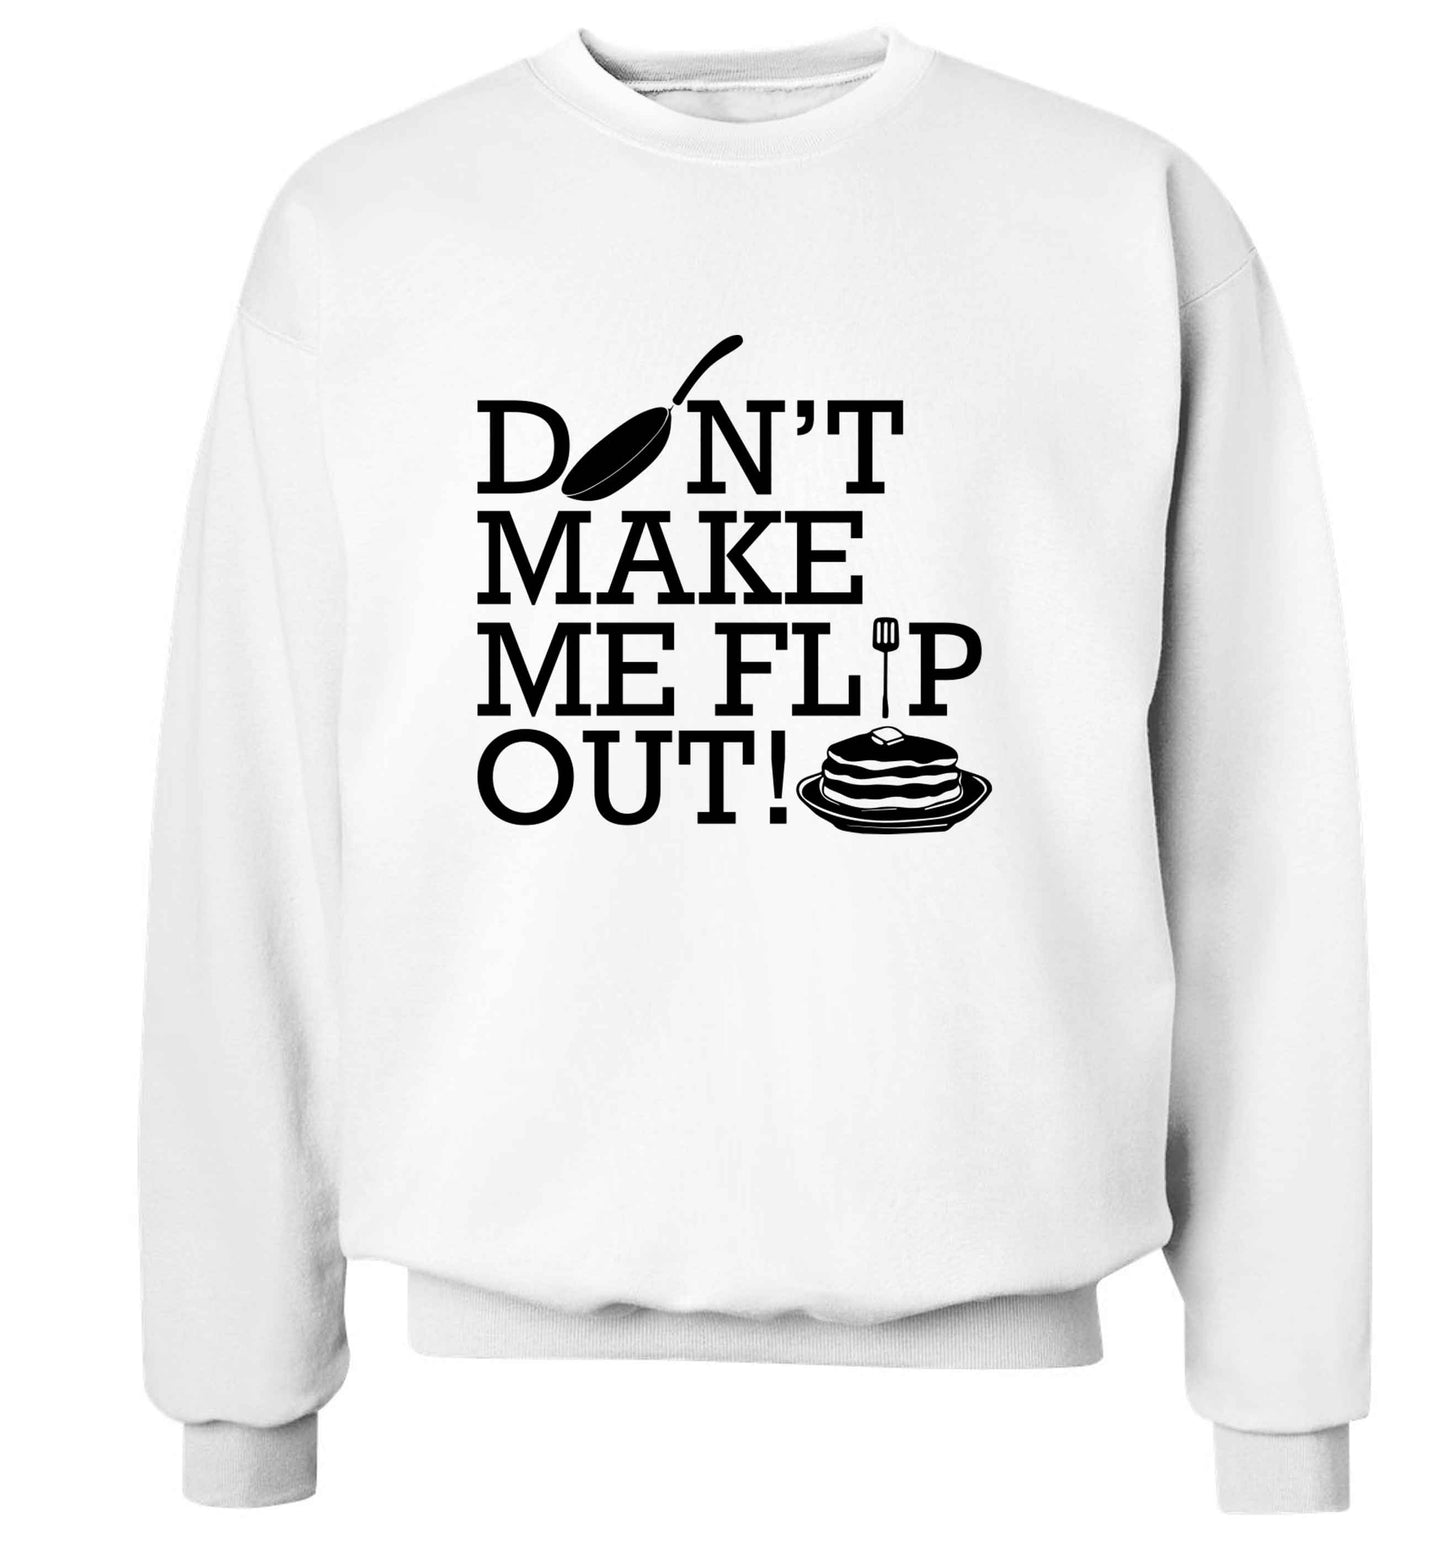 Don't make me flip out adult's unisex white sweater 2XL